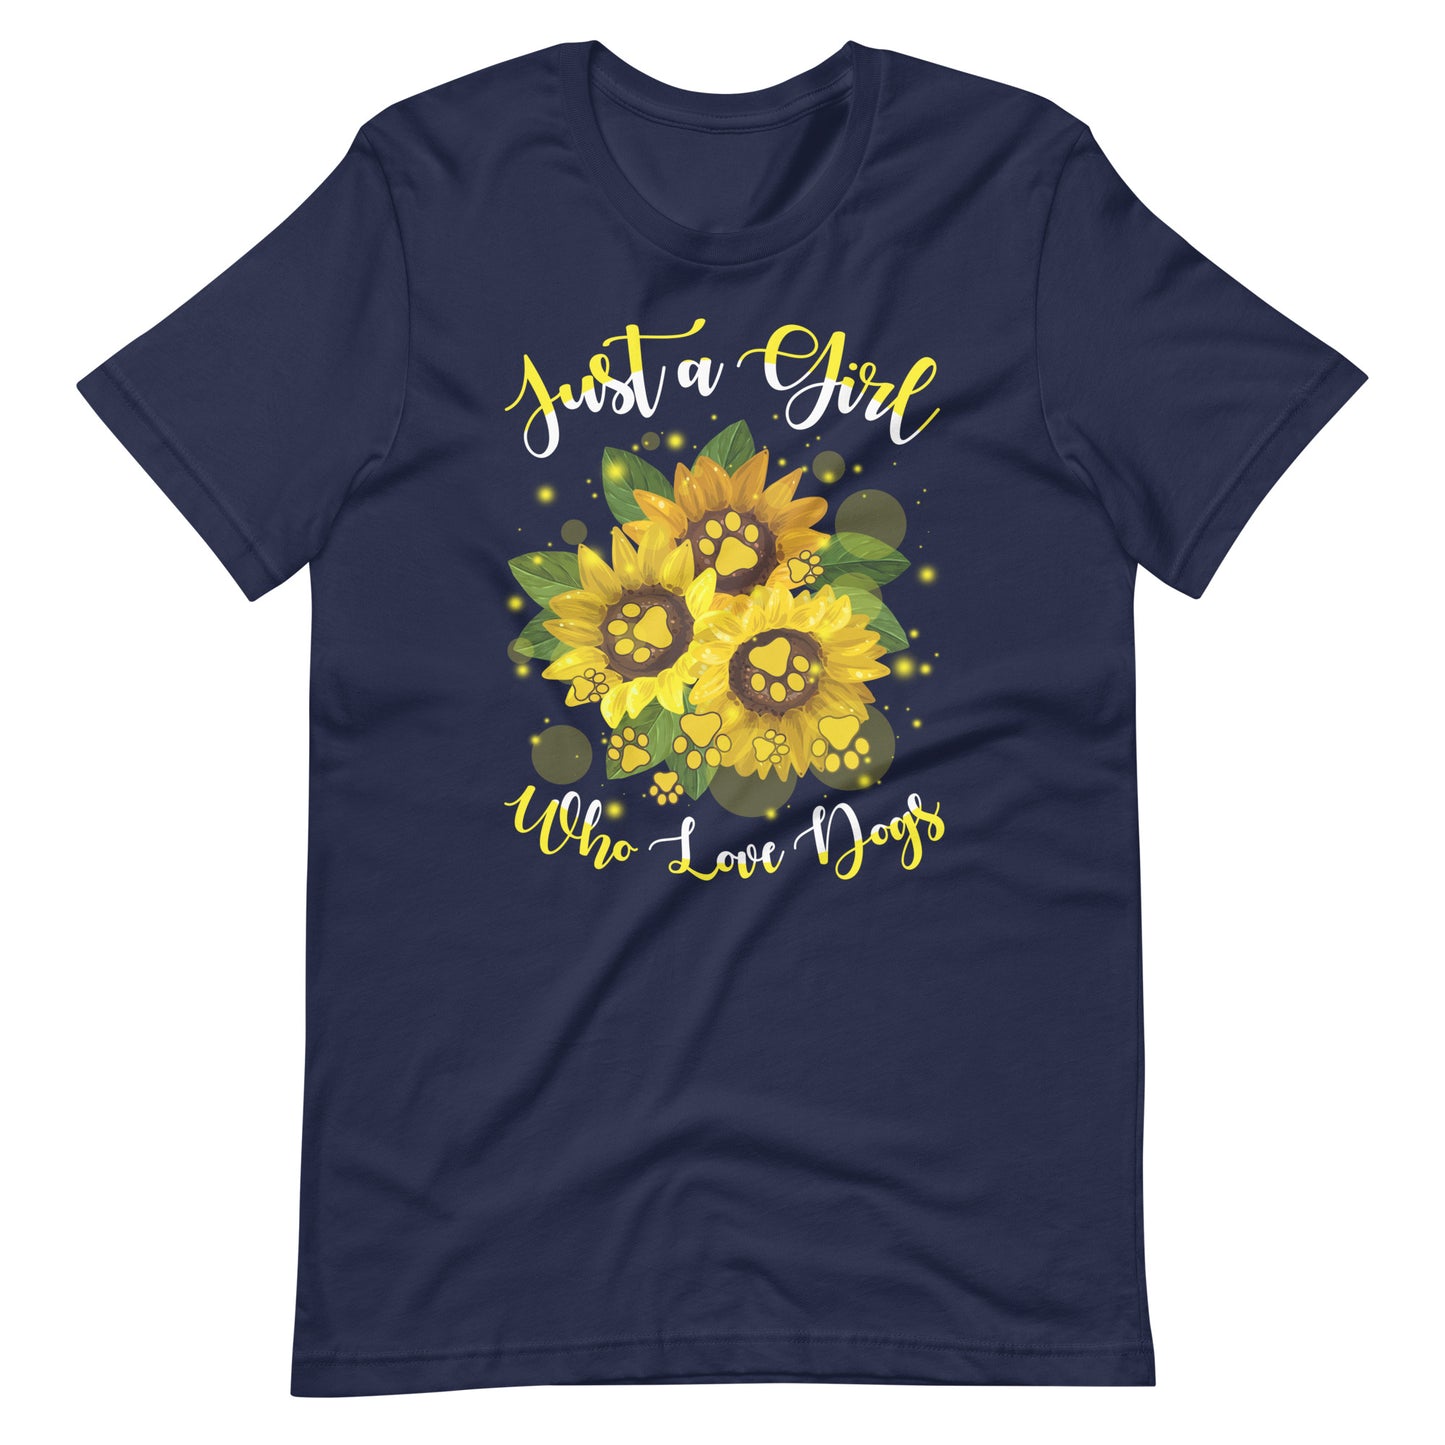 Just a Girl Who Loves Dogs T-Shirt